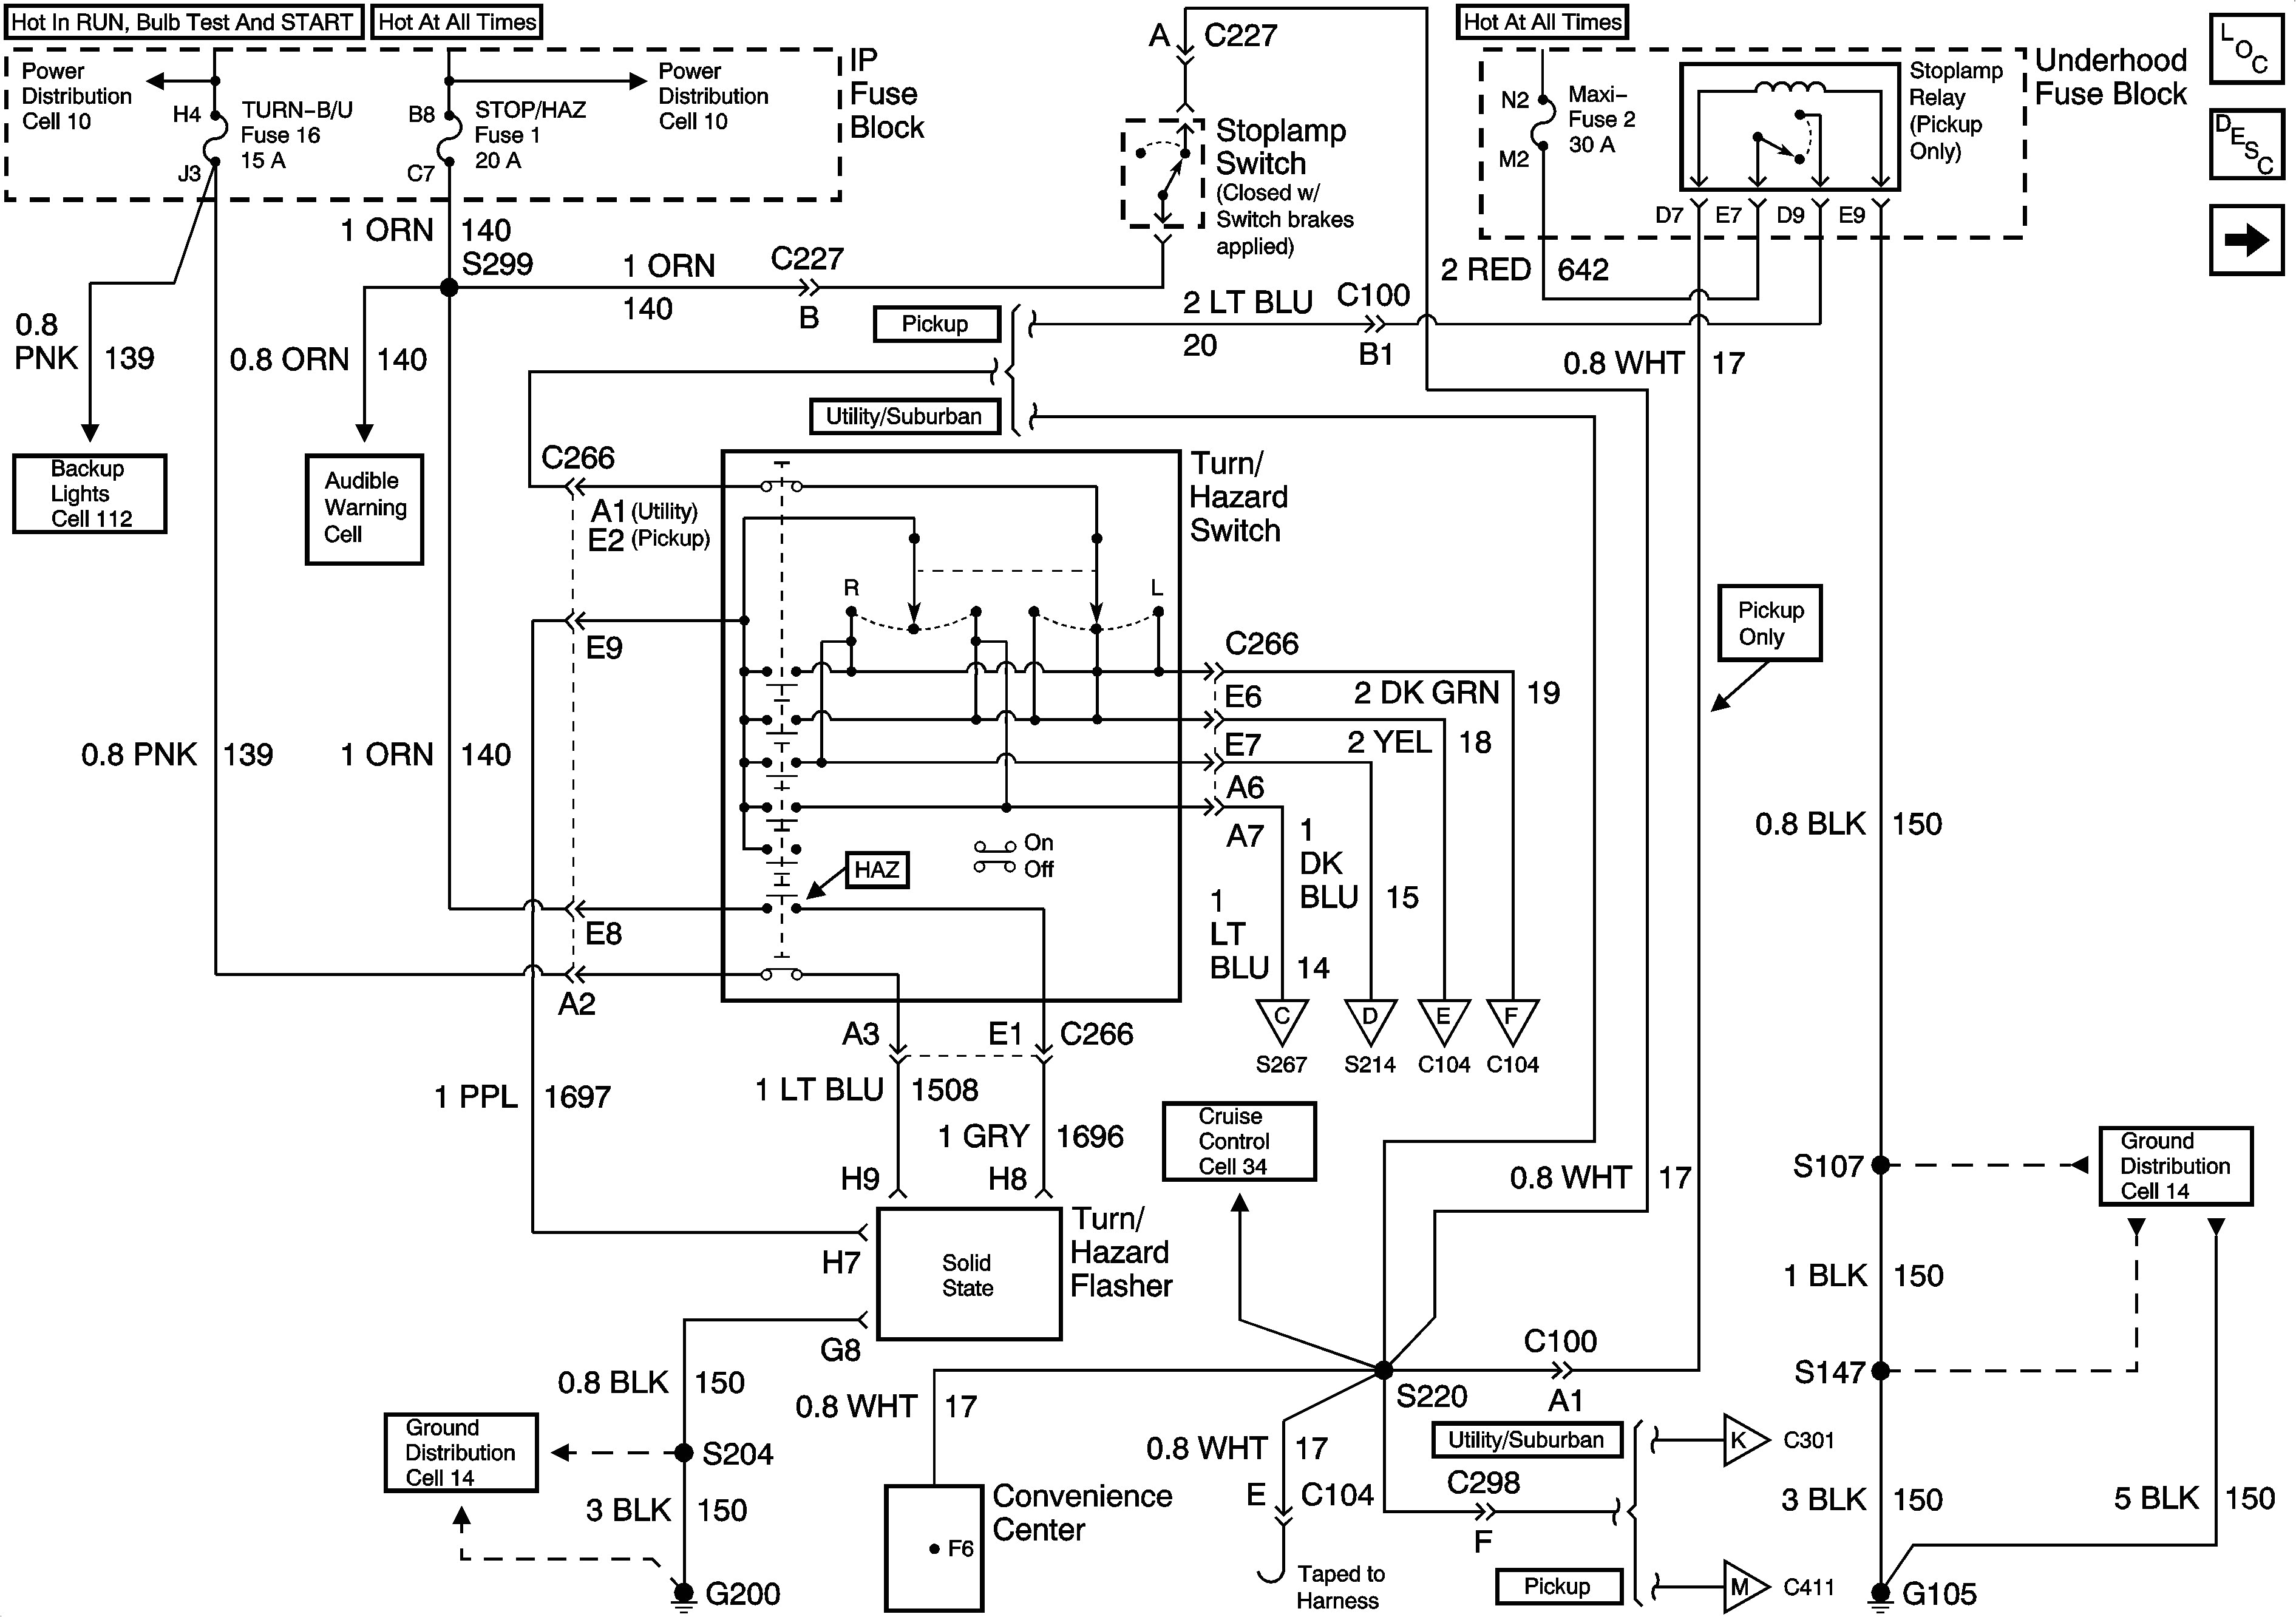 1999 chevy s10 wiring diagram diagram additionally 1999 chevy s10 wiring diagram besides chevy s10 rh mitzuradio me 11t jpg